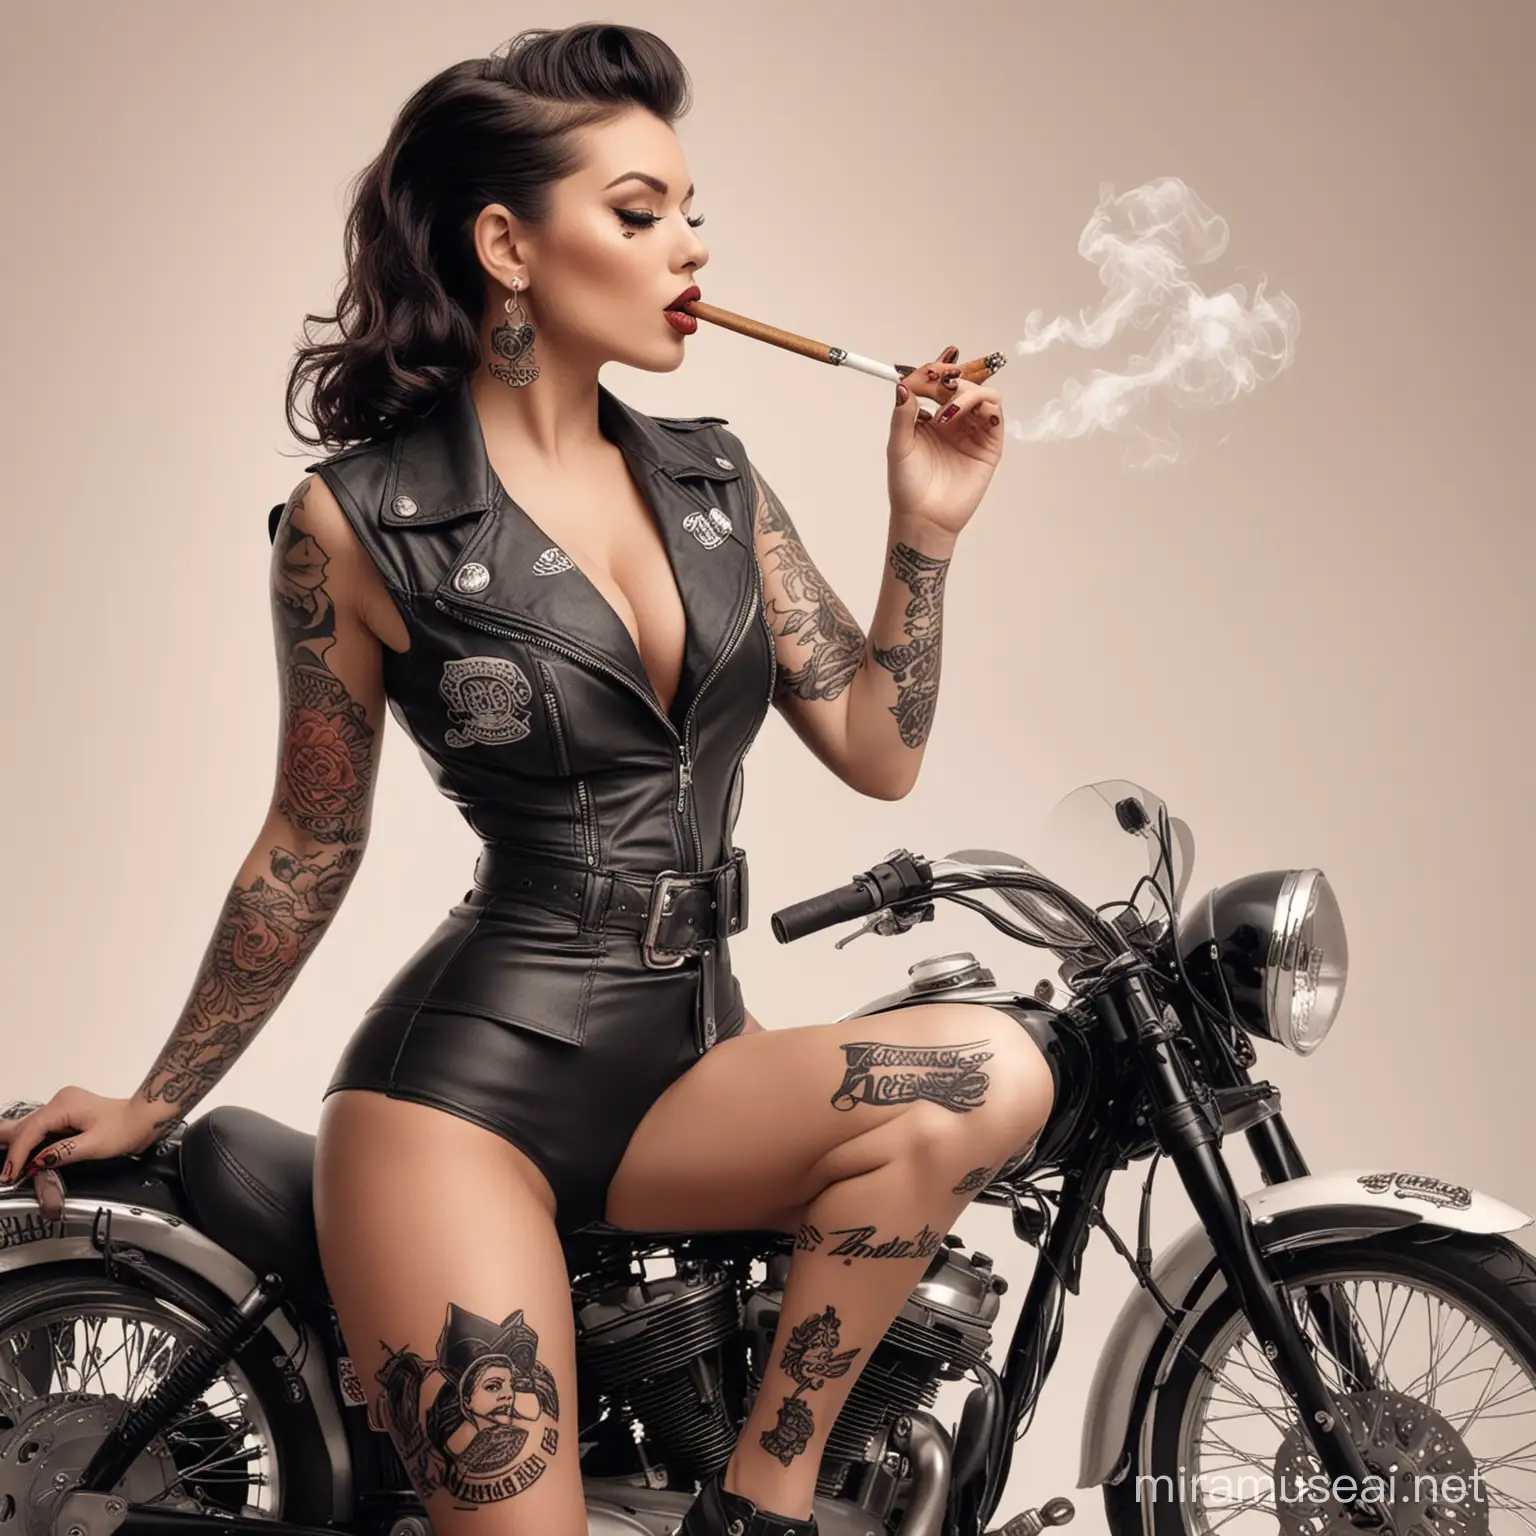 tattoo pin up, white background
Riding a motorcycle and smoking {the smoke must comes out from the cigarette or woman lips }(motorcycle must be half of the woman or less than half)
Badass vibe please 🥺